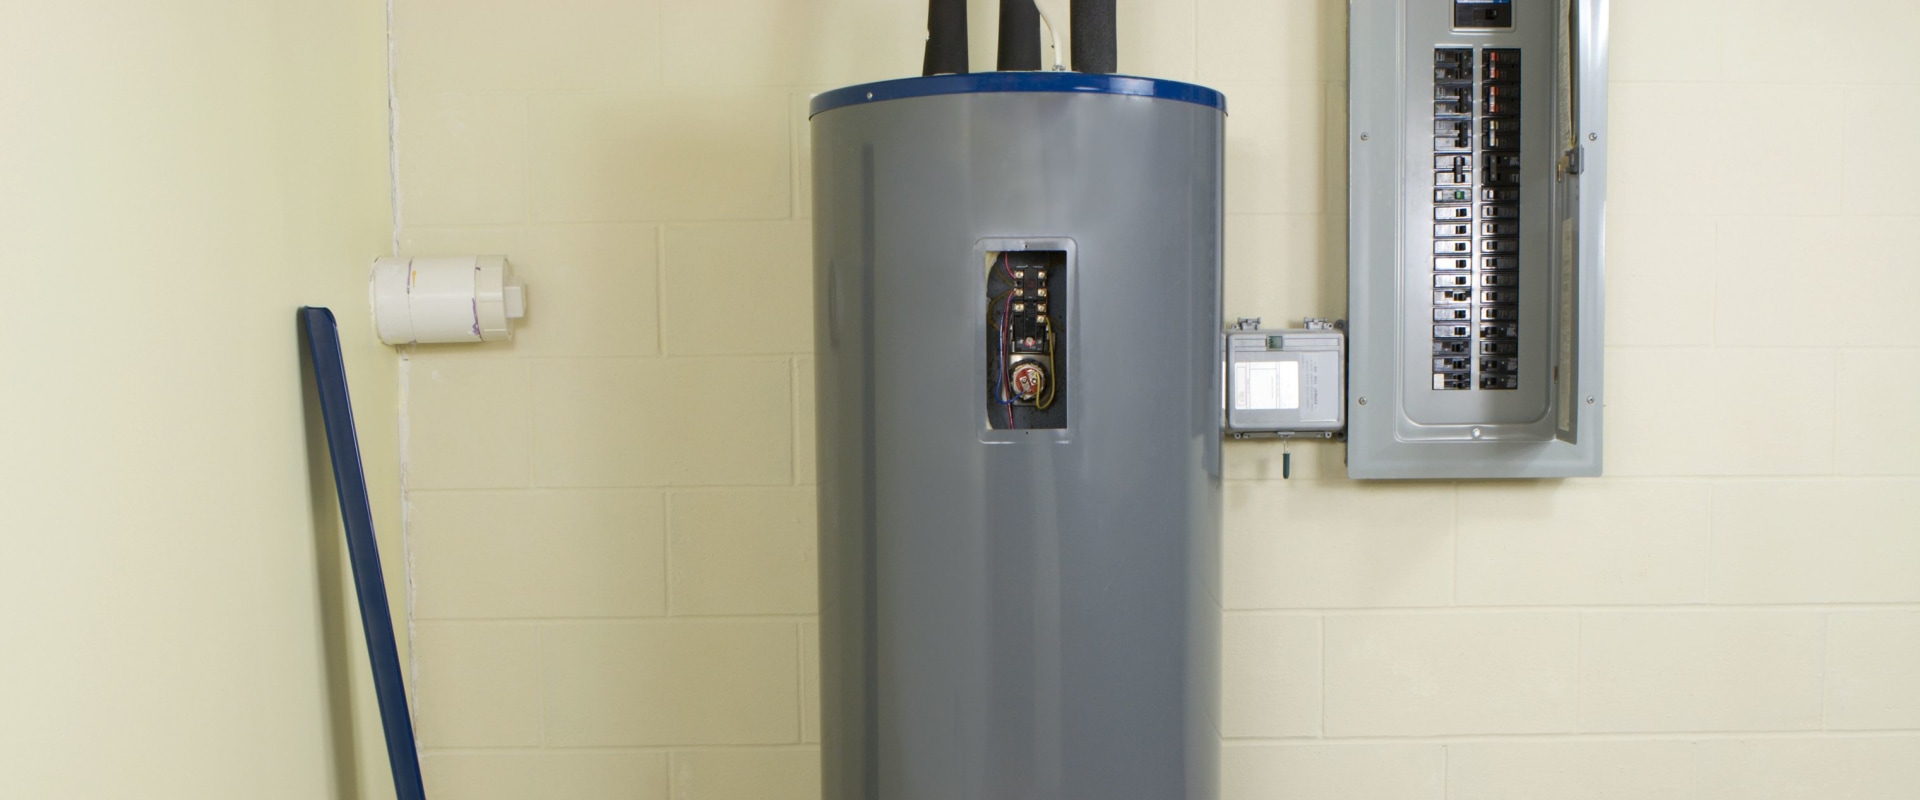 How long does an electric hot water system take to heat up?